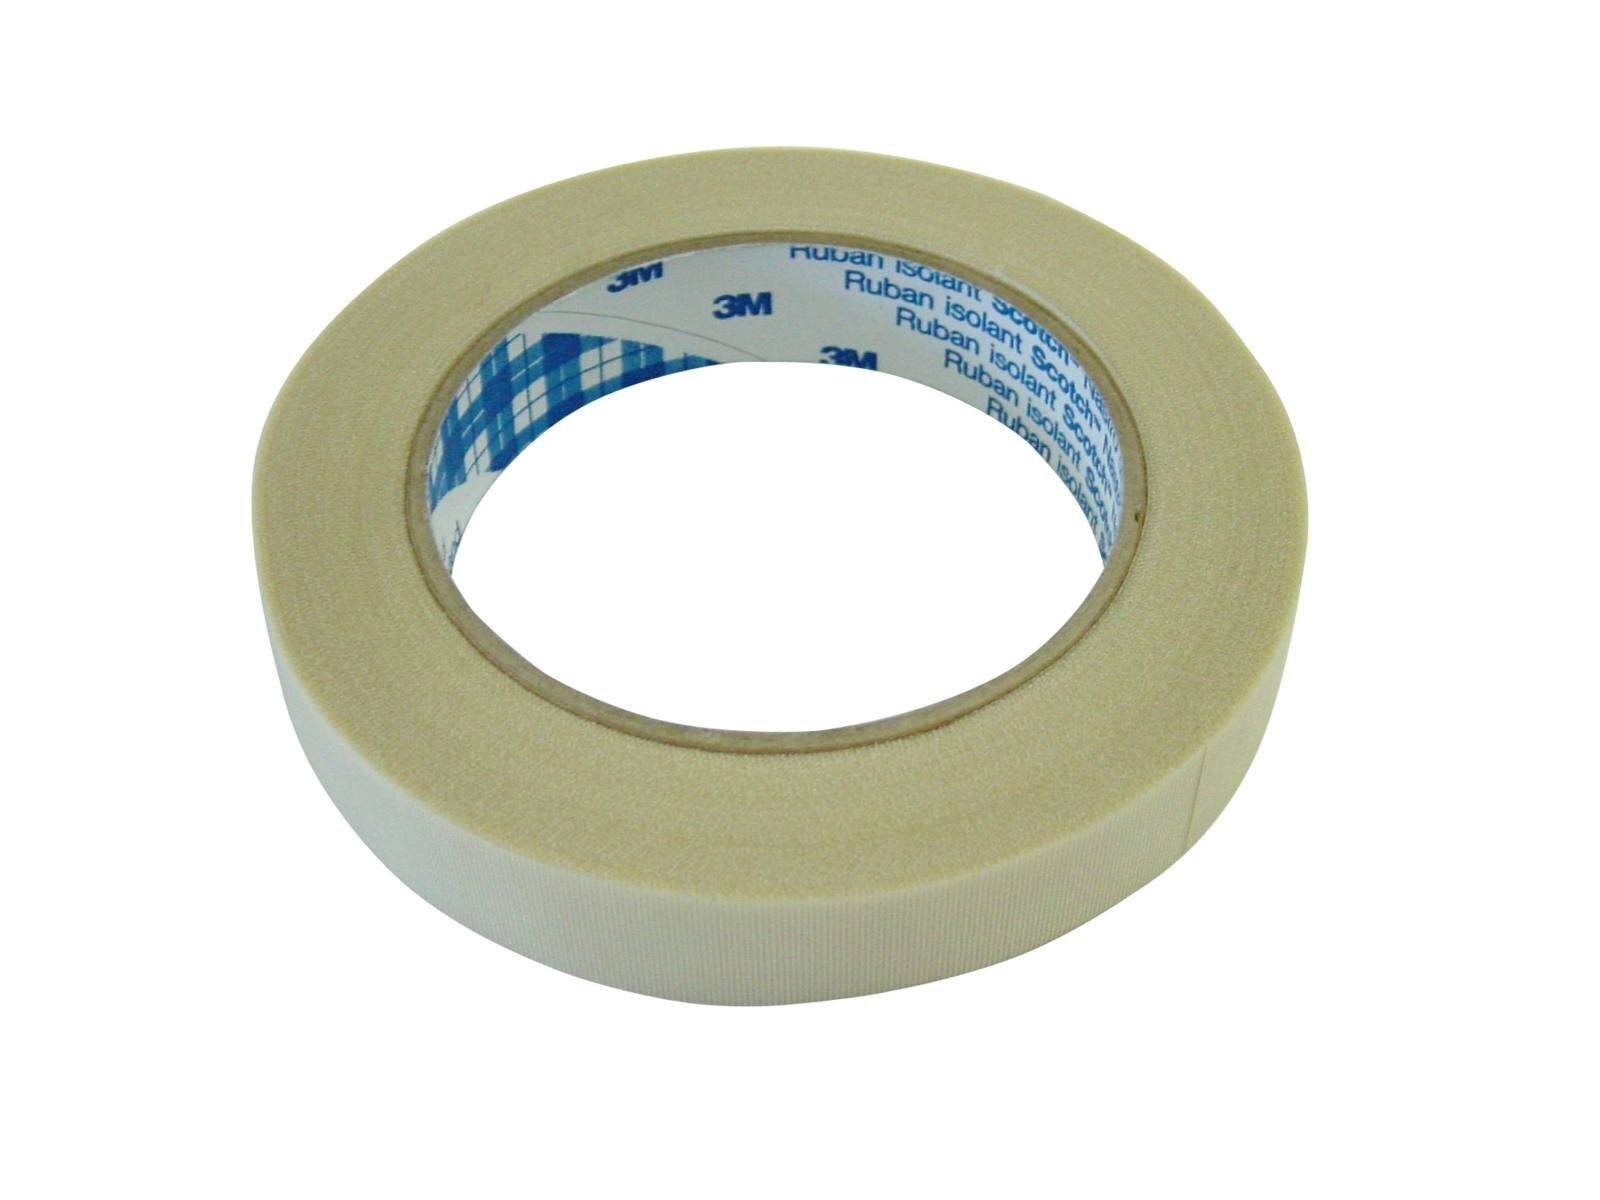 3M ET 69 Glasweefselband, wit, 30 mm x 33 m x 0,18 mm